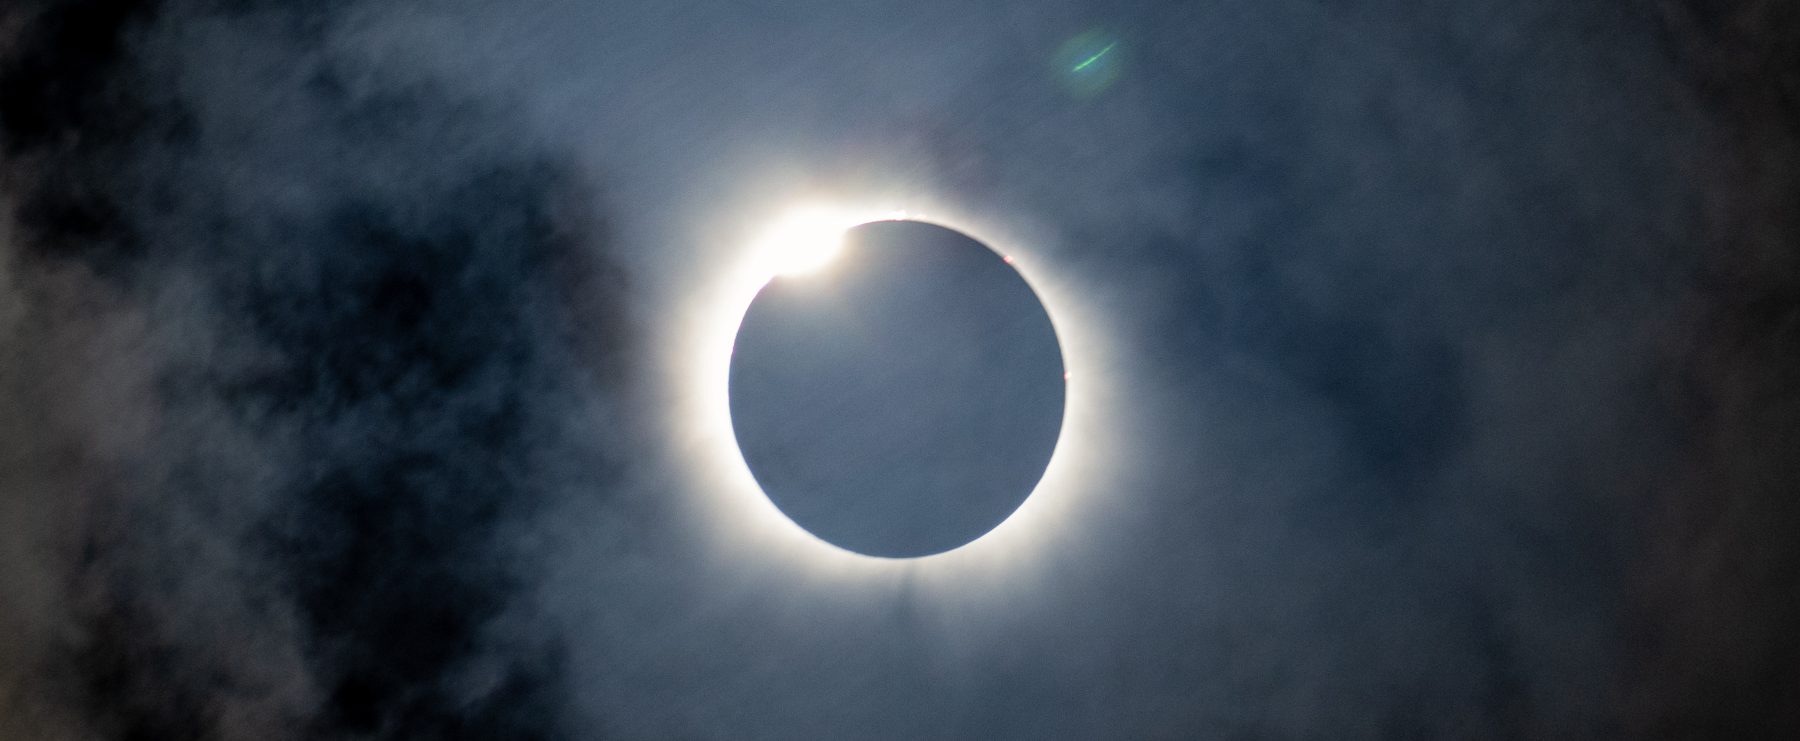 A photo of a total solar eclipse viewable through a thin layer of clouds.